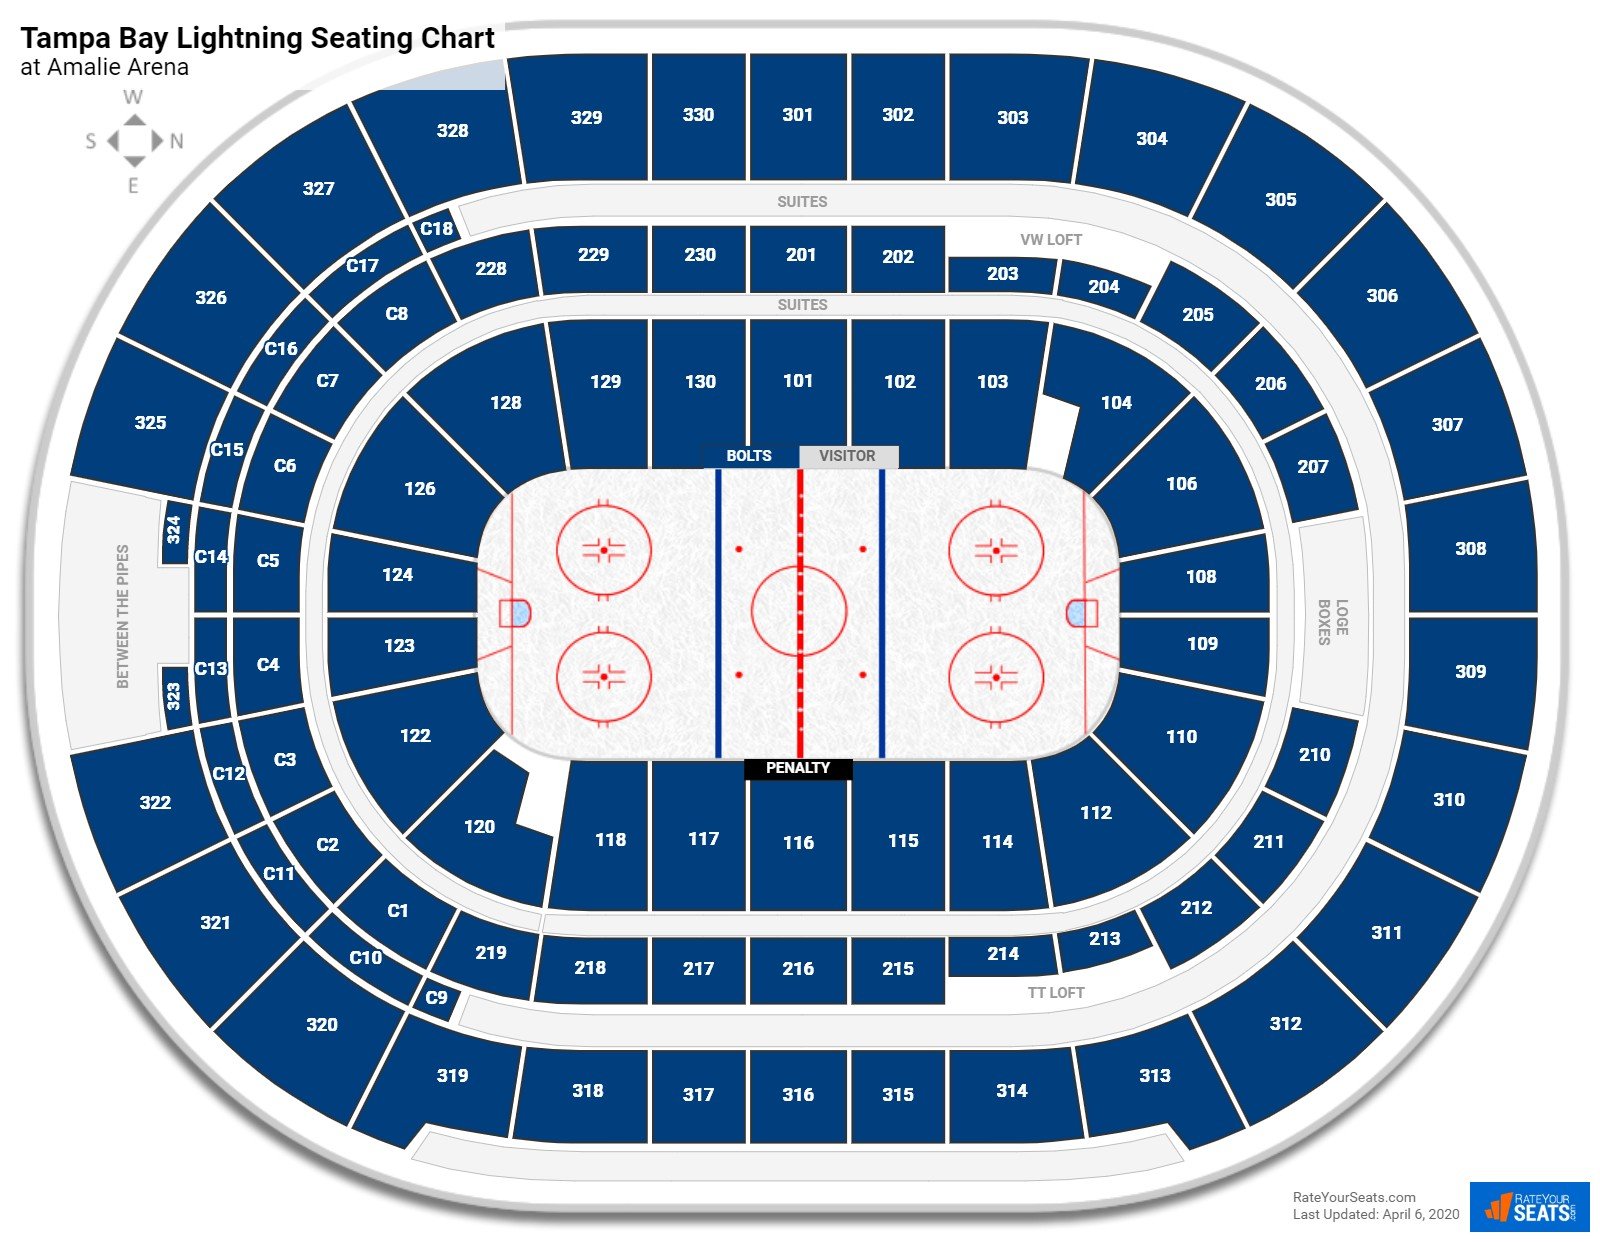 Amalie Arena: Gate & Entrance Guide - Your Quick Navigation Tool - The  Stadiums Guide